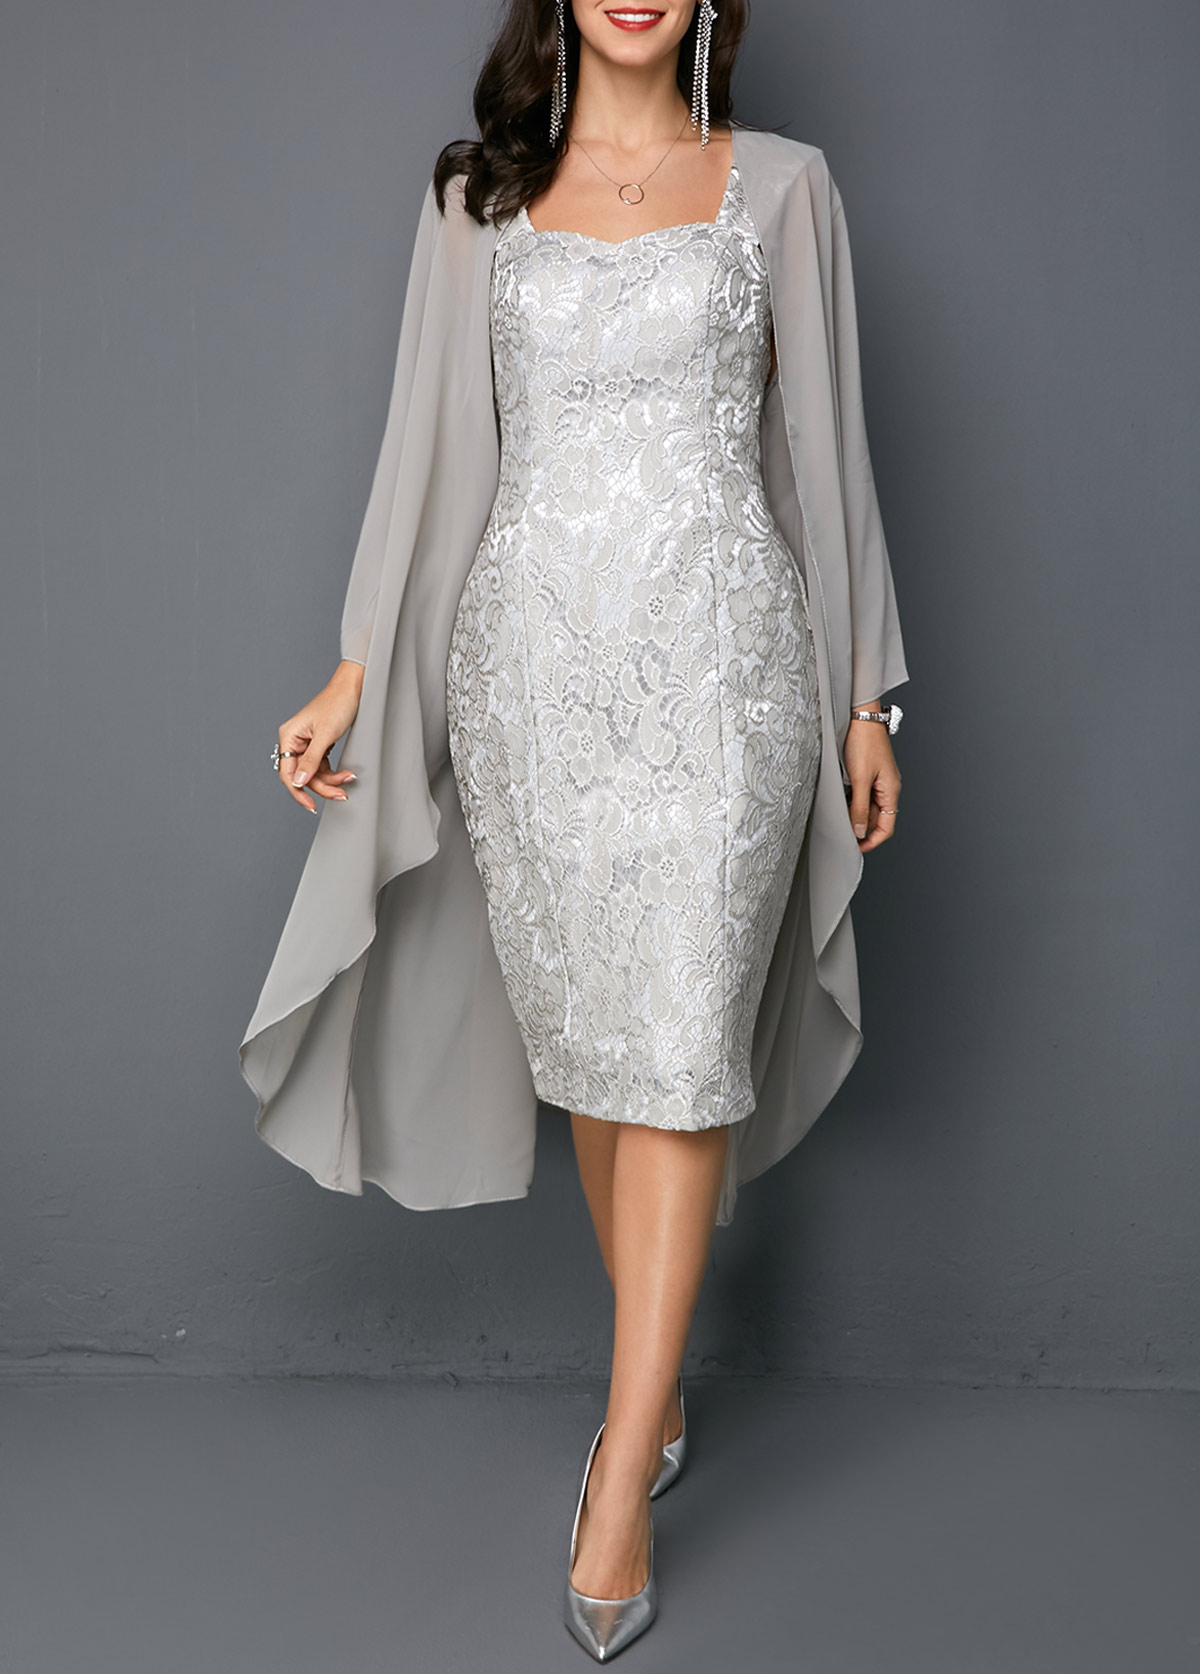 ROTITA Open Front Cardigan and Tie Back Sleeveless Lace Dress